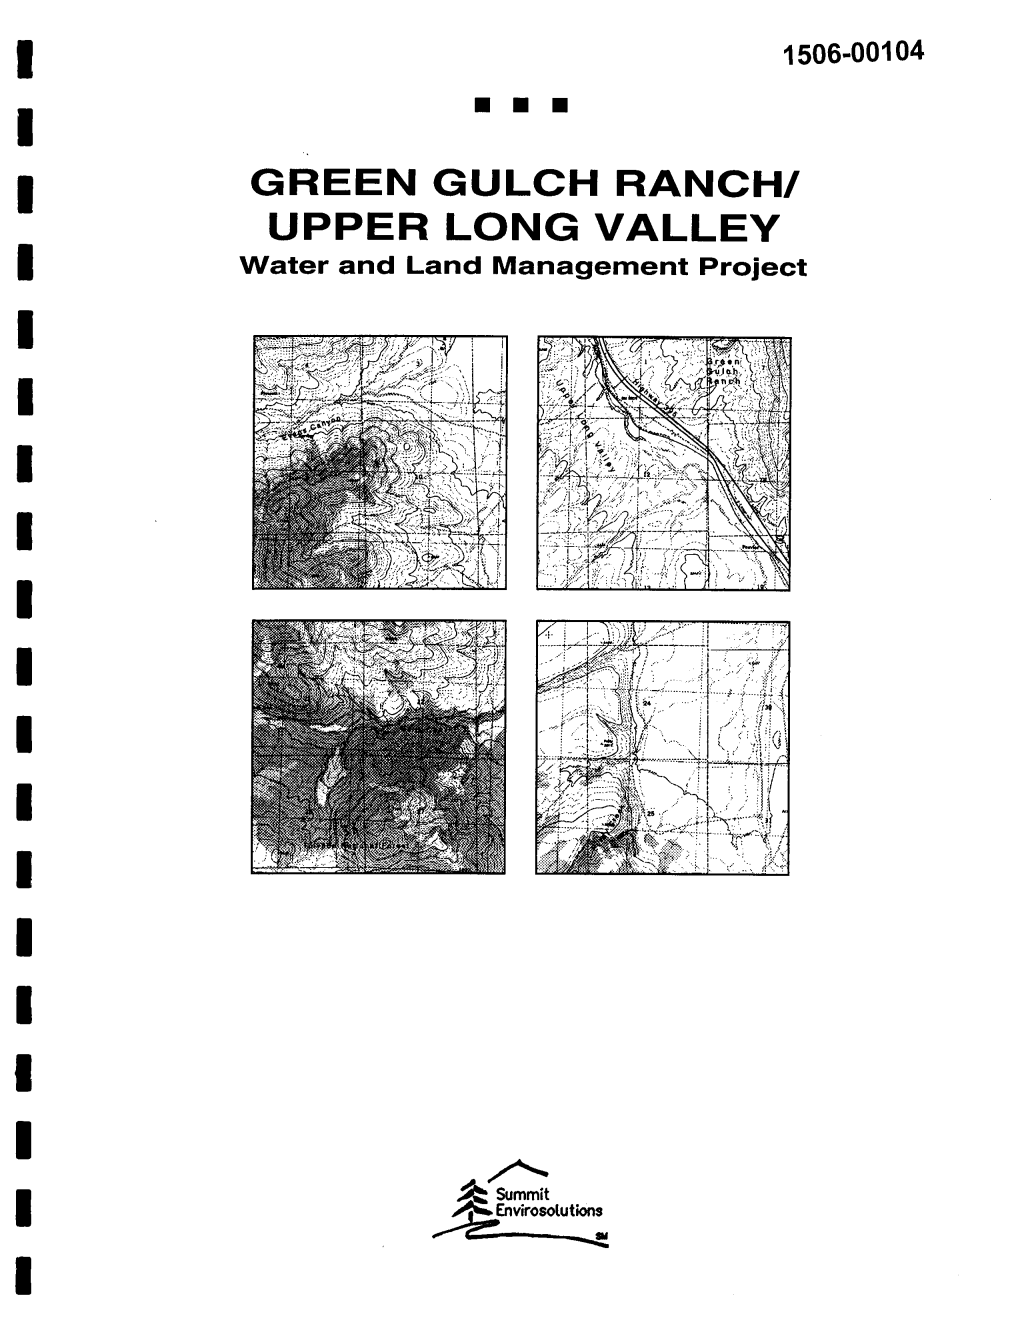 GREEN GULCH RANCHI UPPER LONG VALLEY Water and Land Management Project